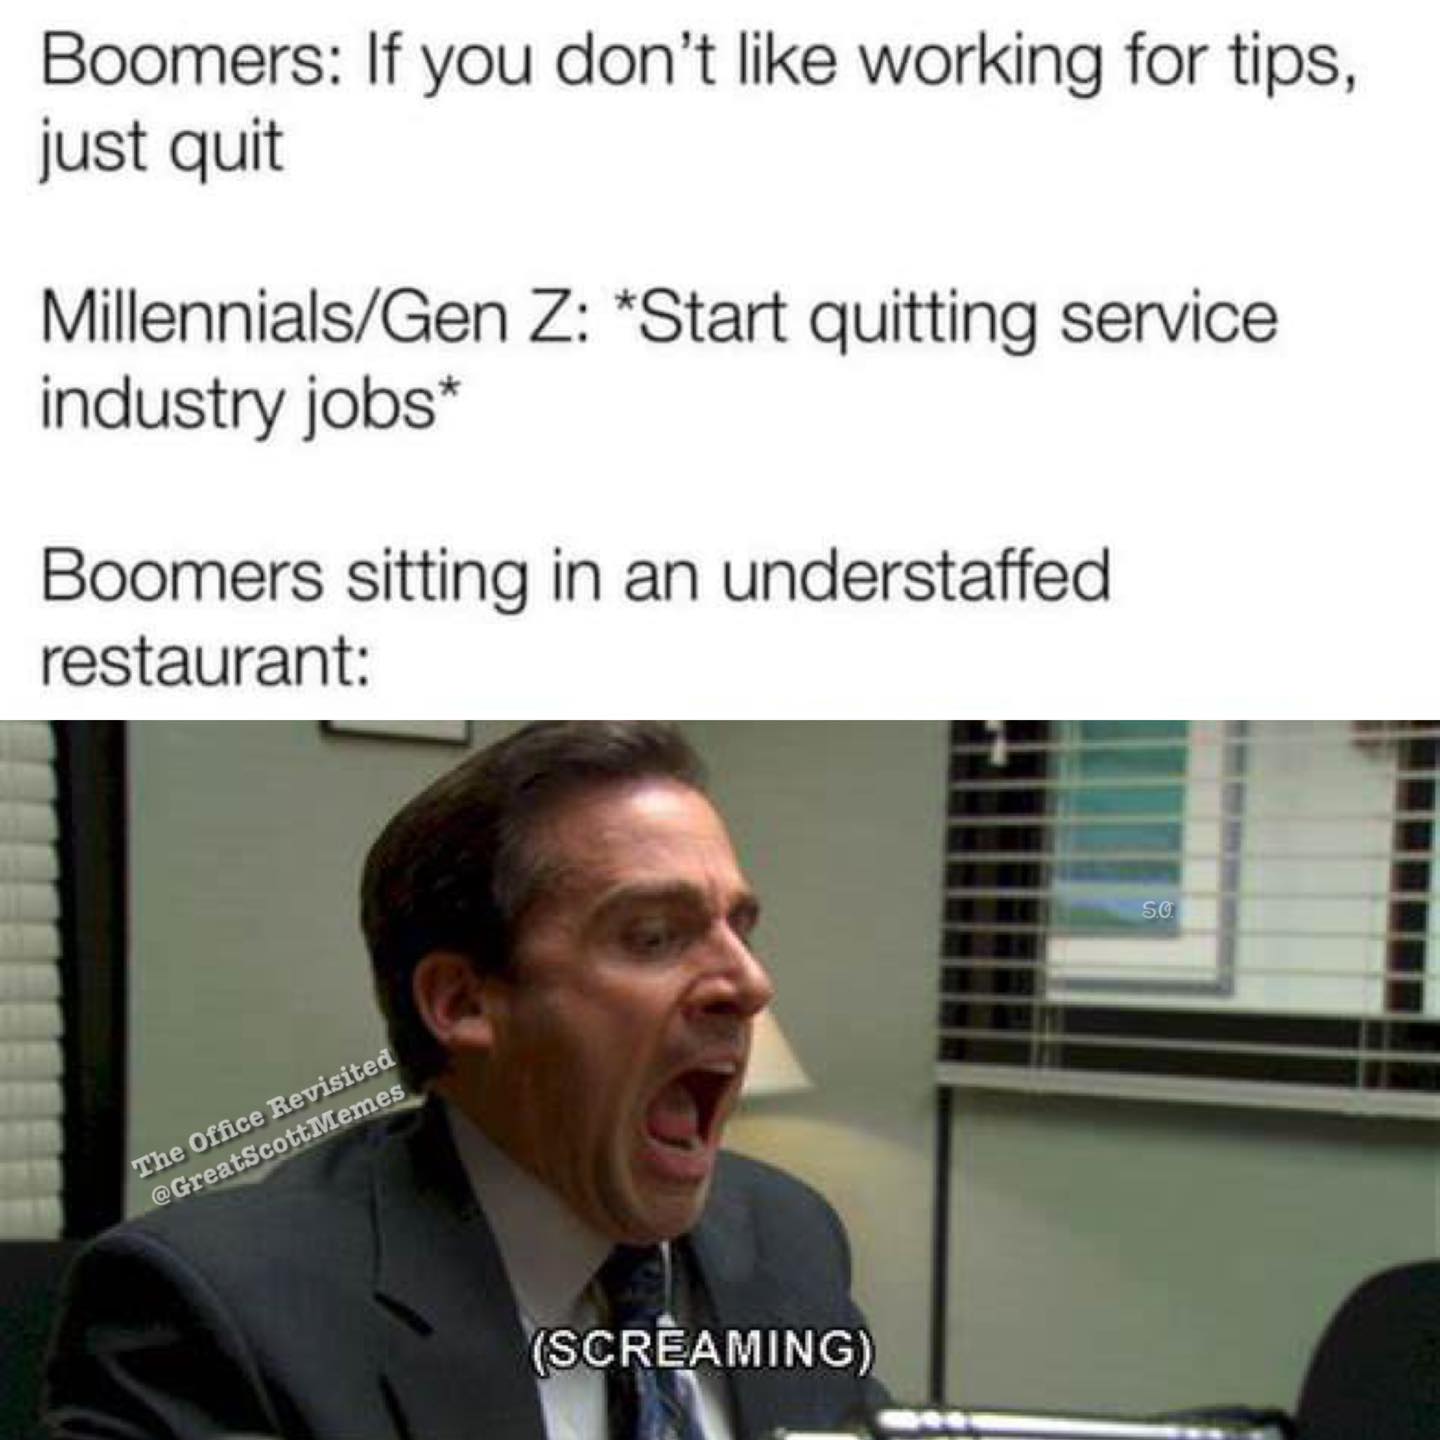 funny memes - presentation - Boomers If you don't working for tips, just quit MillennialsGen Z Start quitting service industry jobs Boomers sitting in an understaffed restaurant The Office Revisited Memes Screaming So